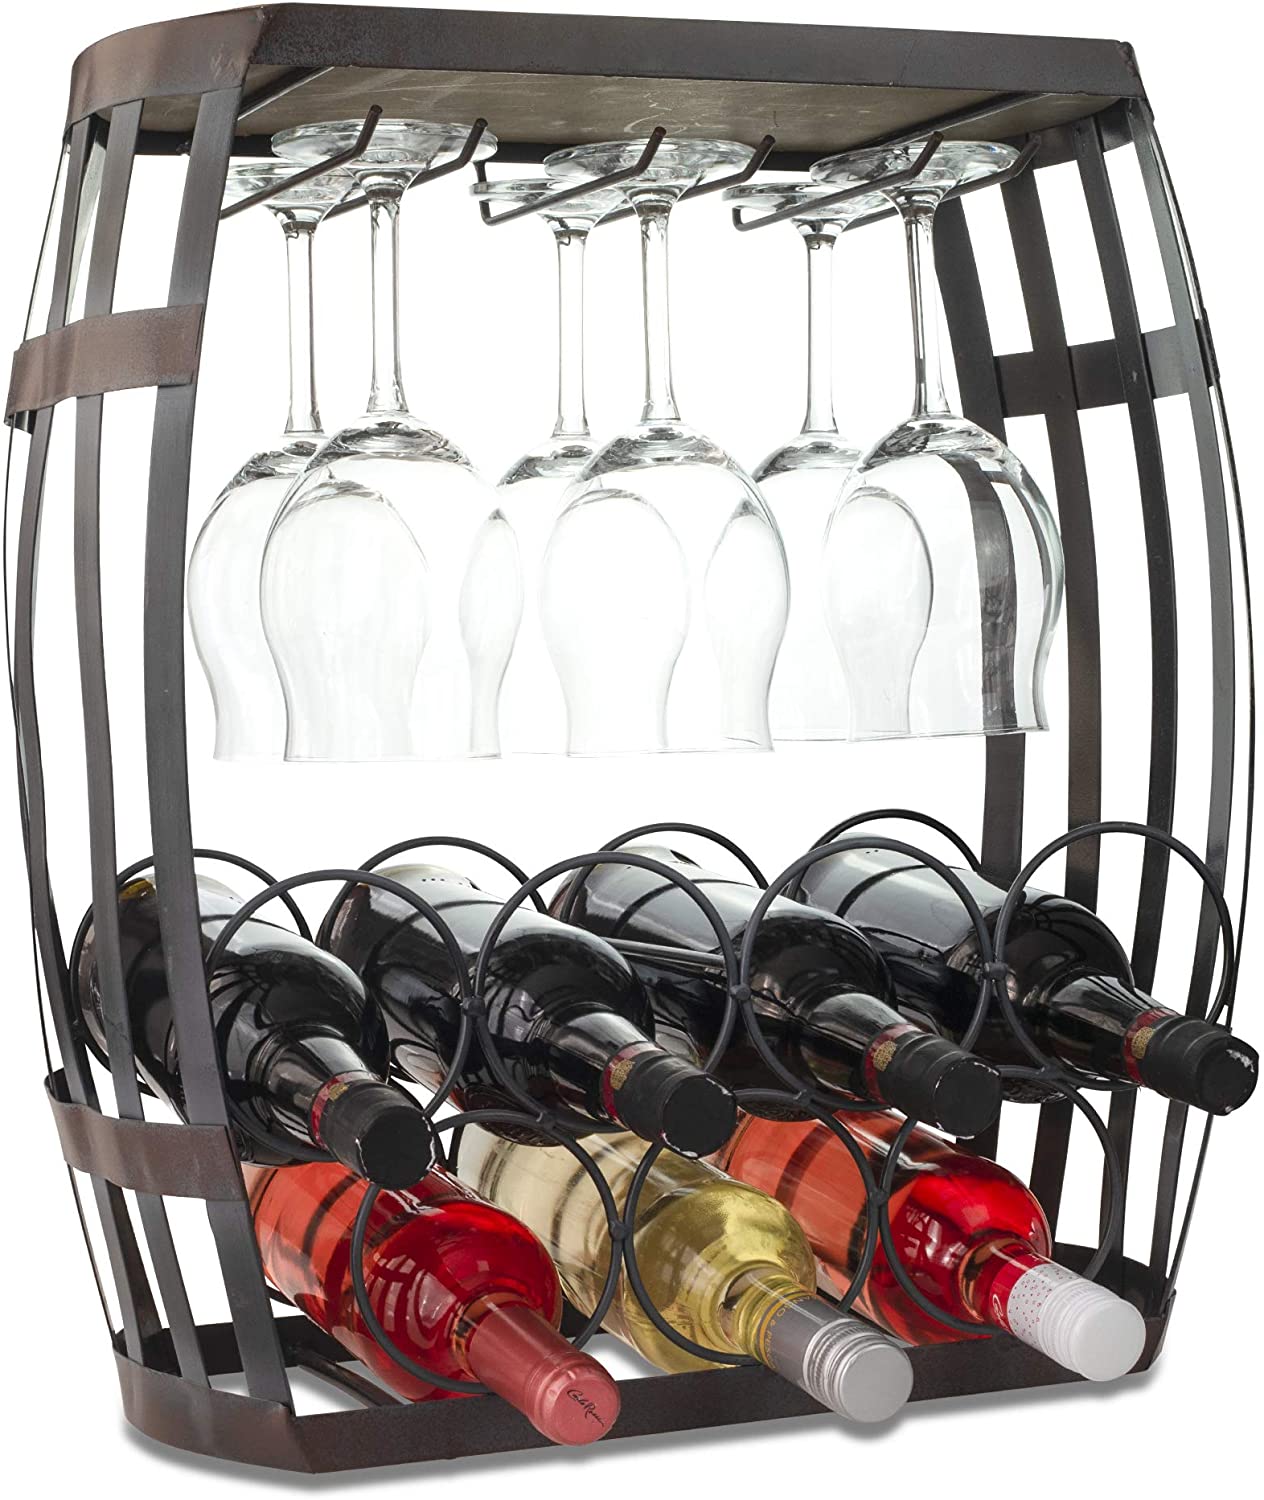 B07XLZJ7T7 Wine Bottle and Glass Free Standing Counter Top Rack by MEK -  Comes Fully Assembled! (Wine Barrel (20